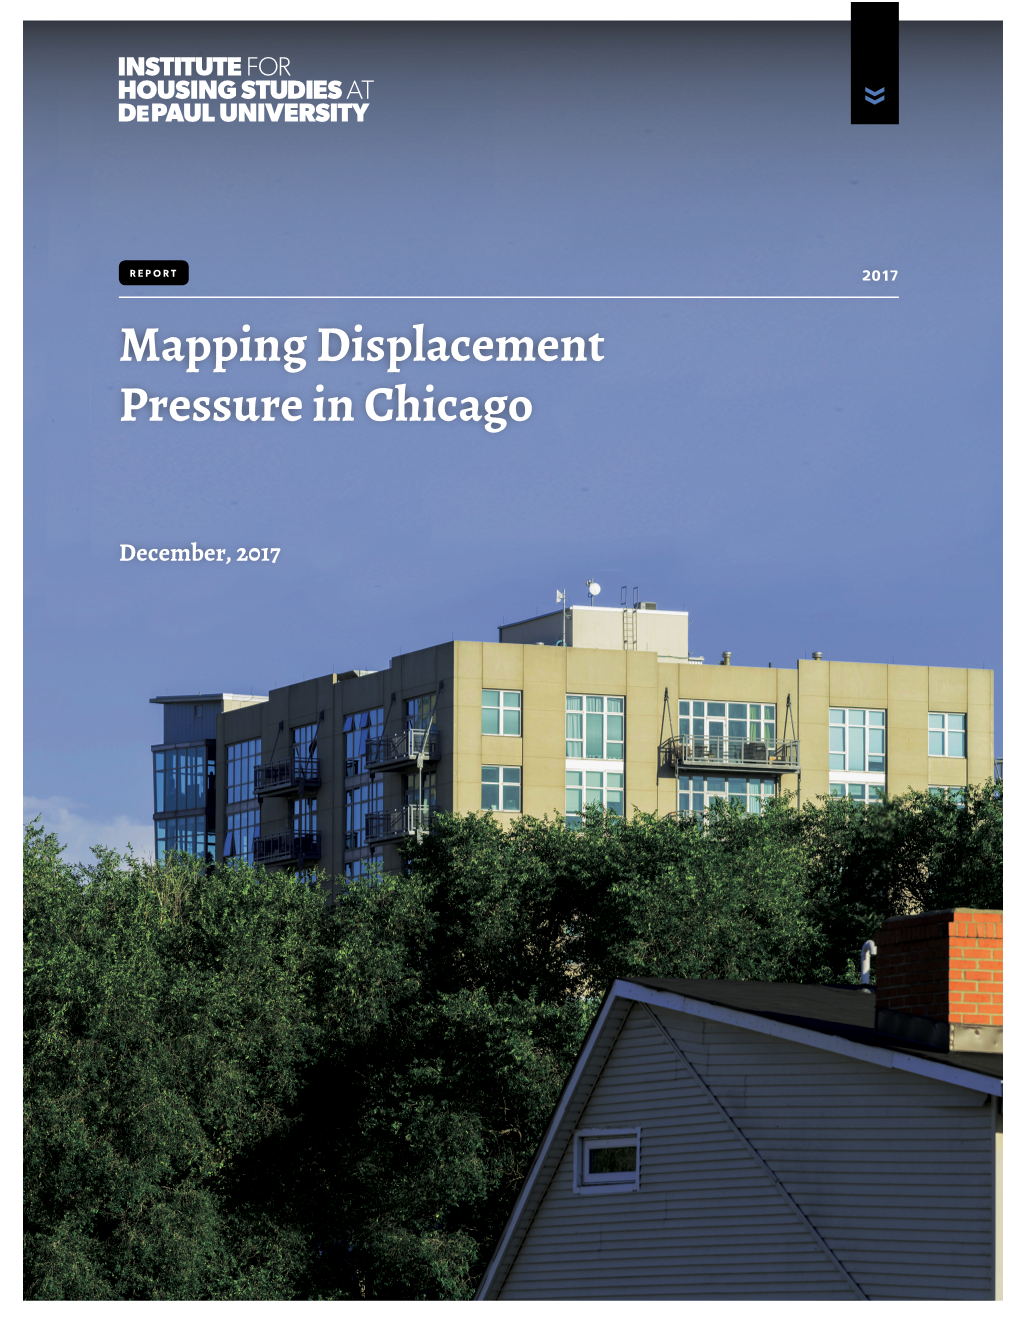 Mapping Displacement Pressure in Chicago